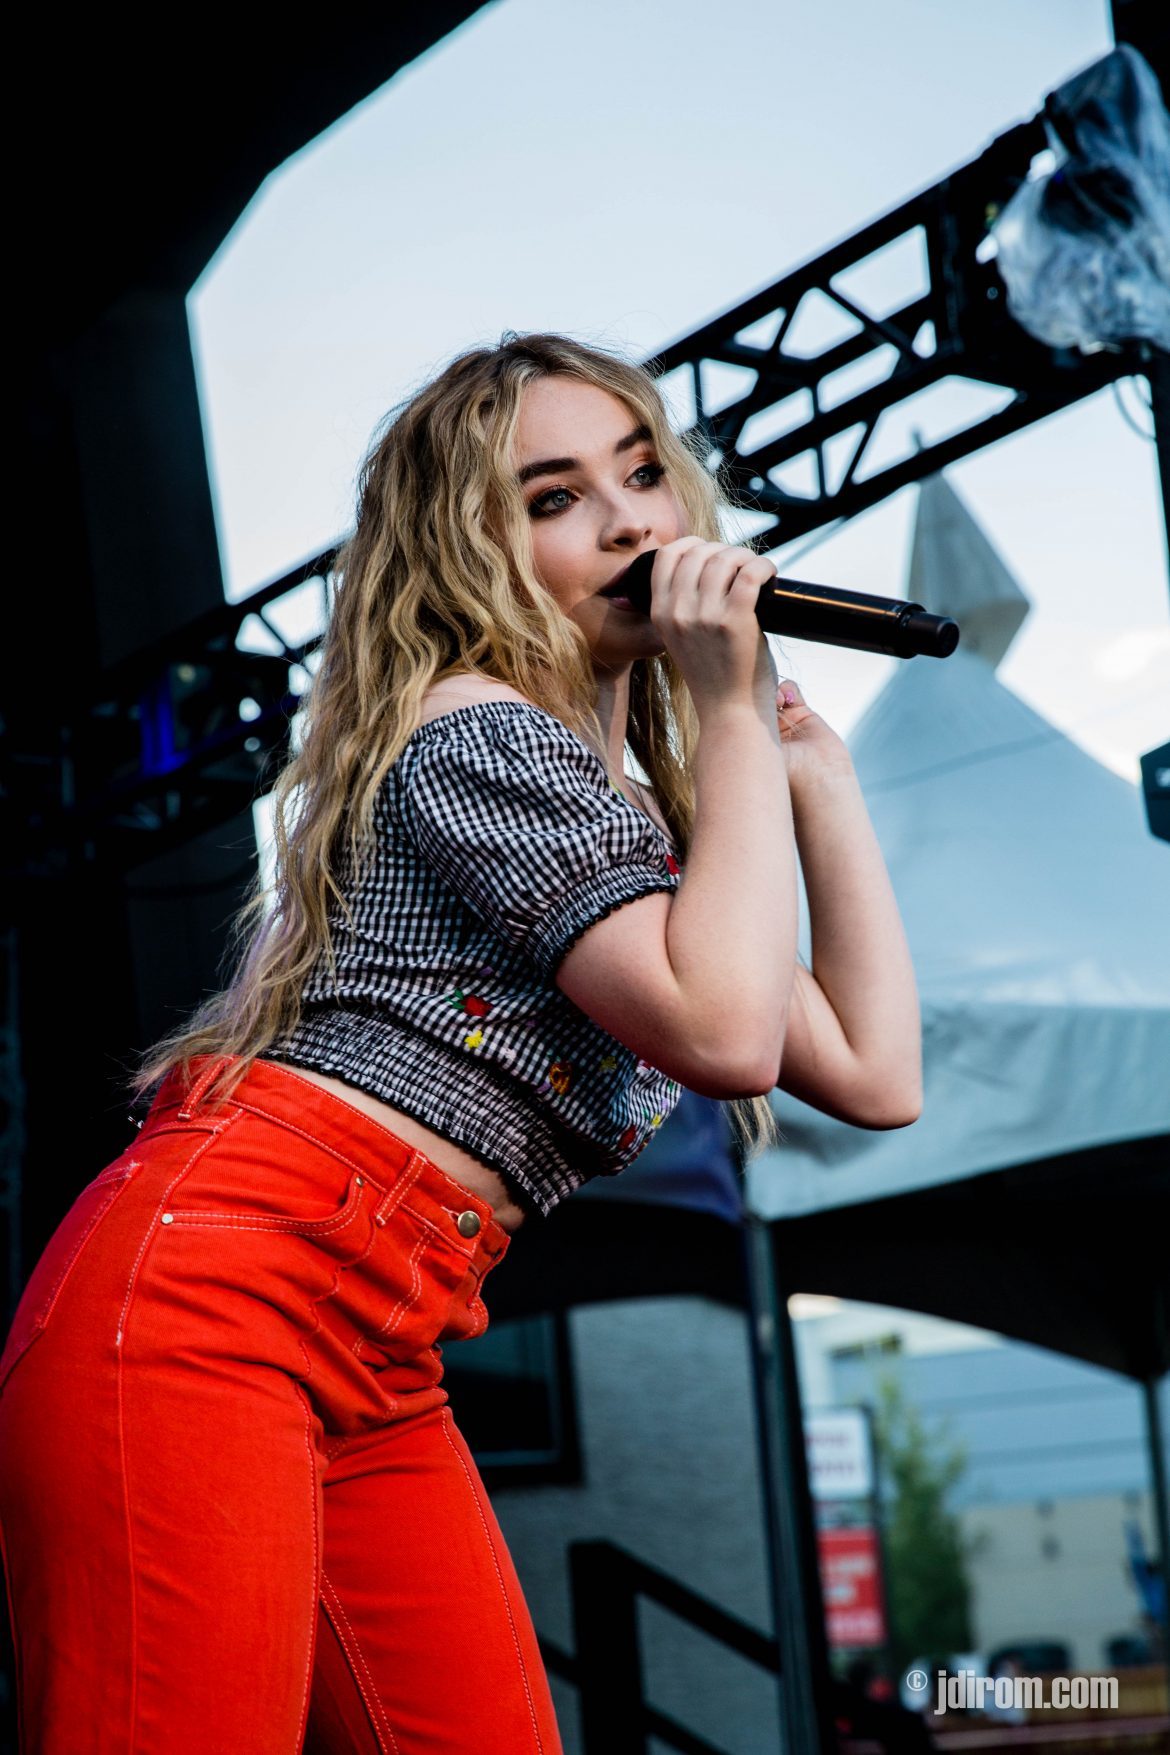 Dallas Patient Wows Sabrina Carpenter with Personal Performance